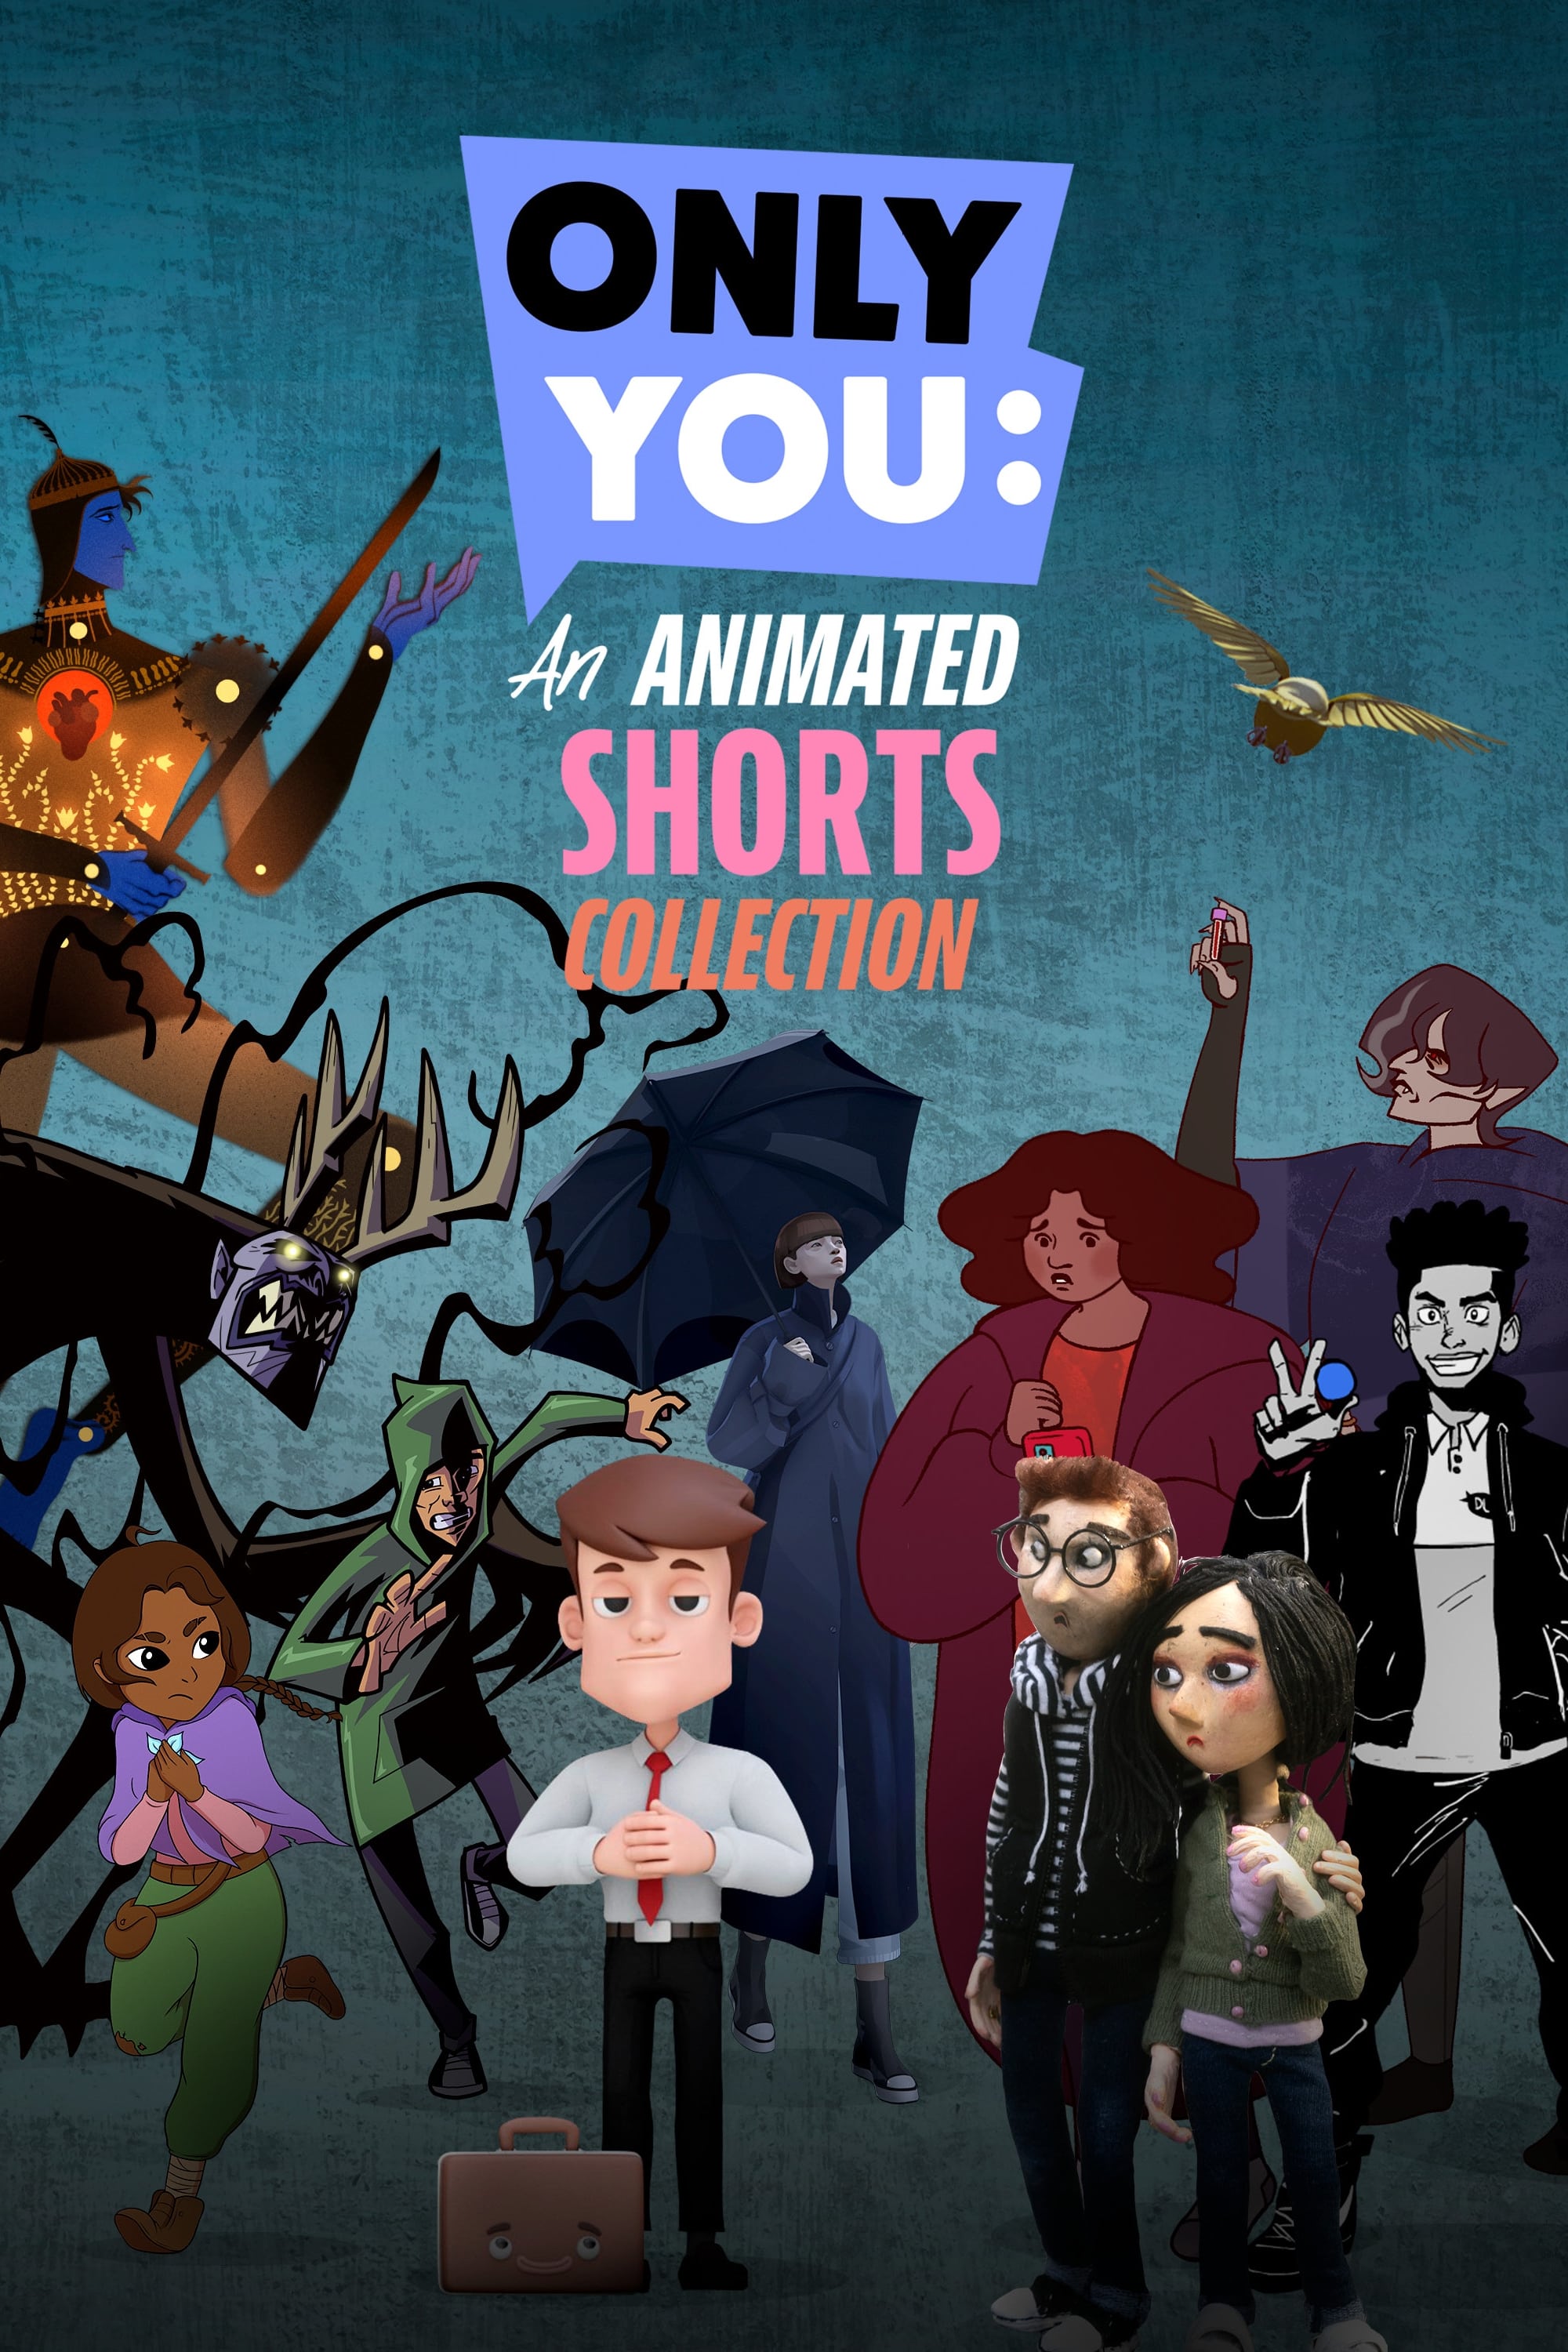 Only You: An Animated Shorts Collection TV Shows About Adult Animation